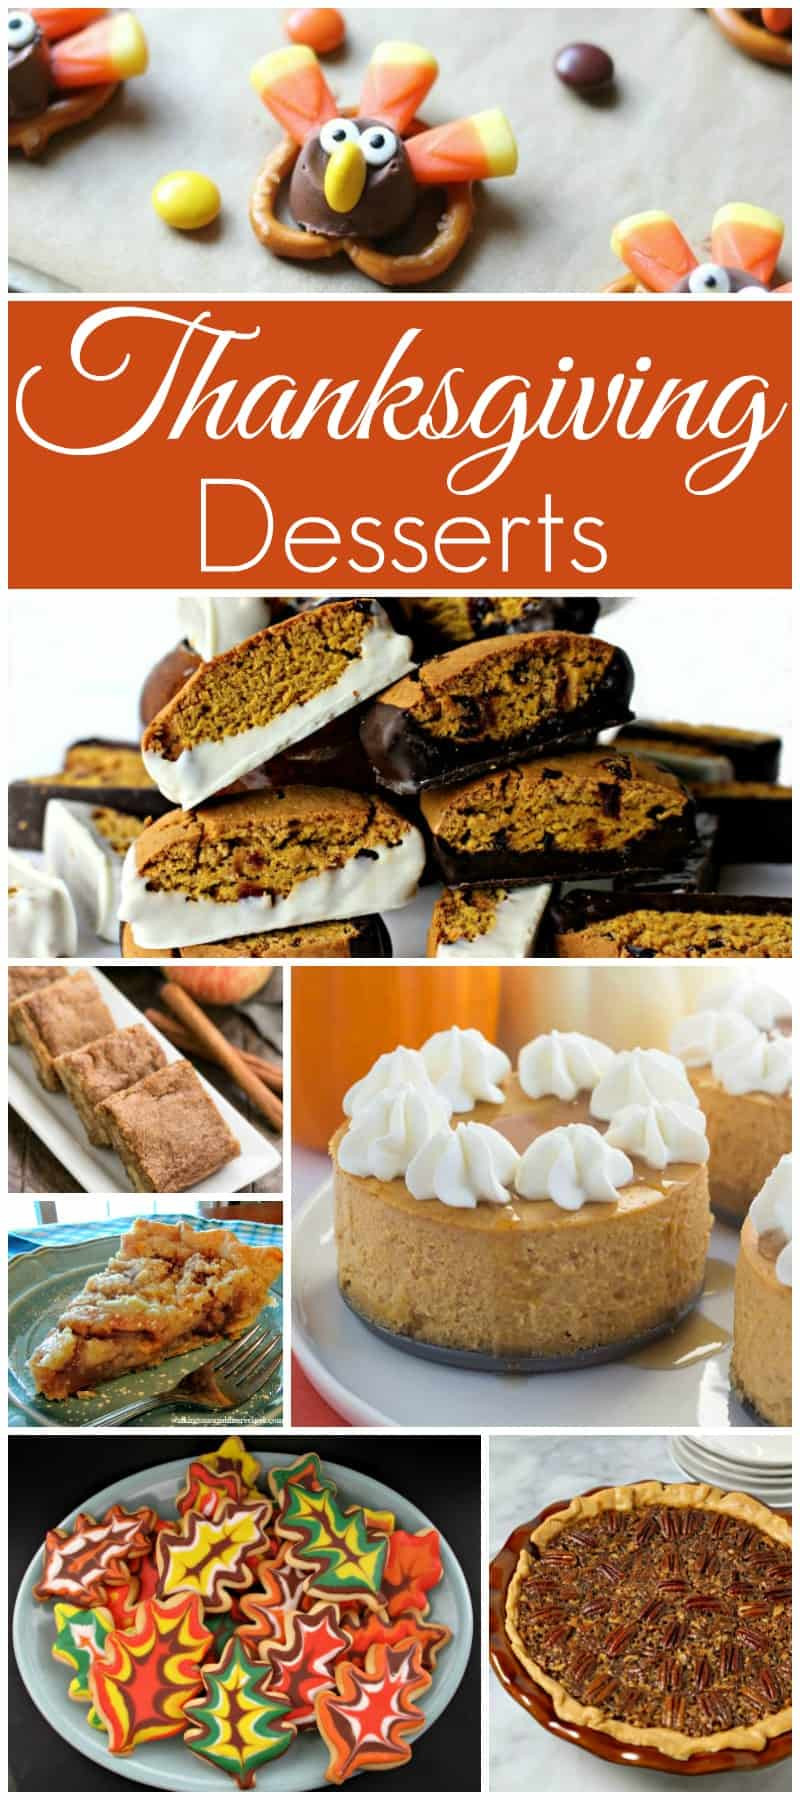 Thanksgiving Desserts Ideas
 Thanksgiving Desserts and our Delicious Dishes Recipe Party